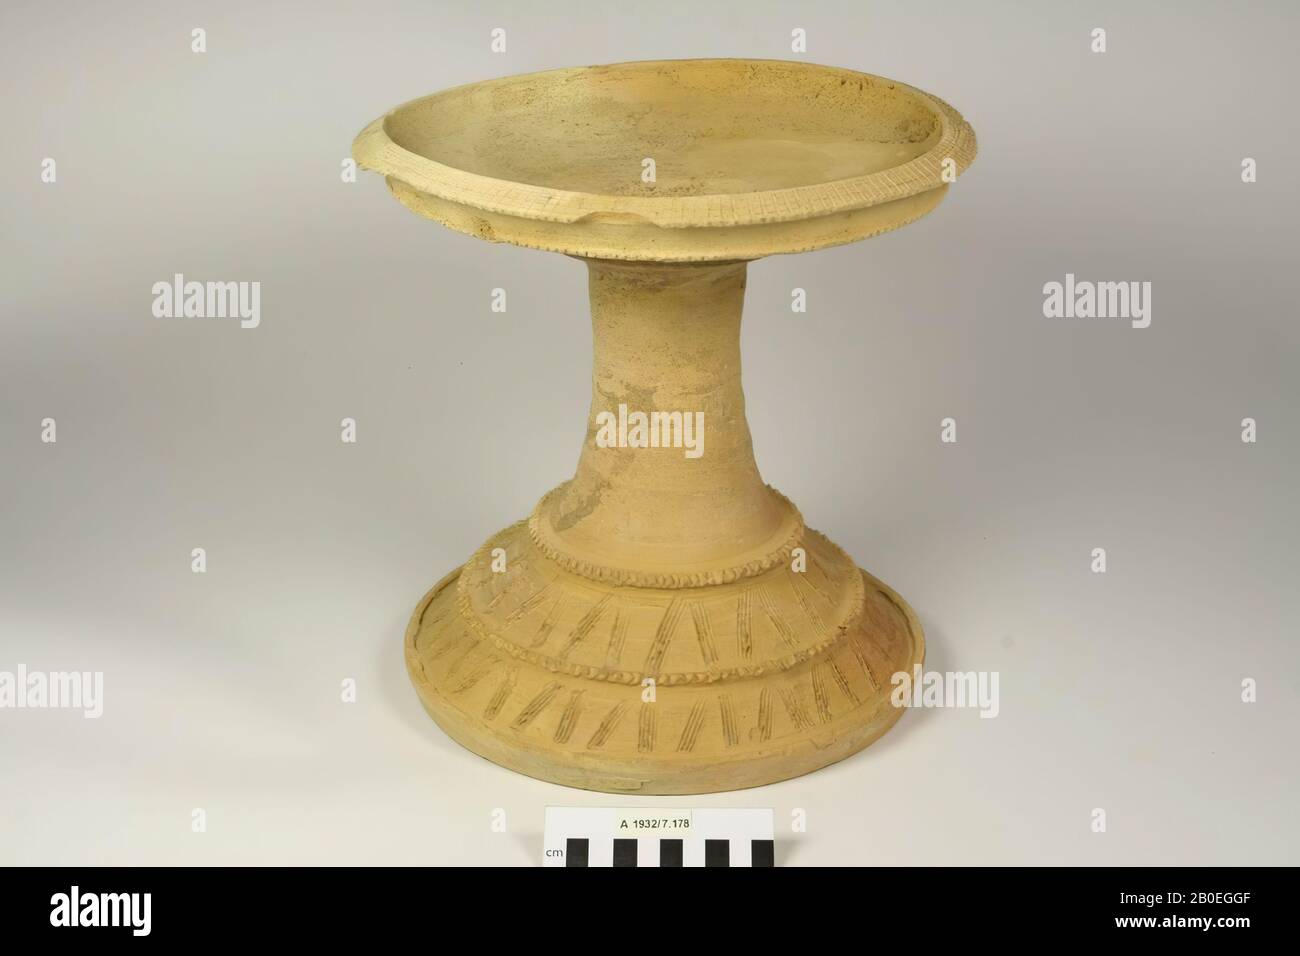 Incense burner or pottery incense pot with fitted decoration, crockery, incense burner, pottery, H 28.5 cm, D 28.5 cm, Early Bronze Age 2800 BC, Iraq Stock Photo